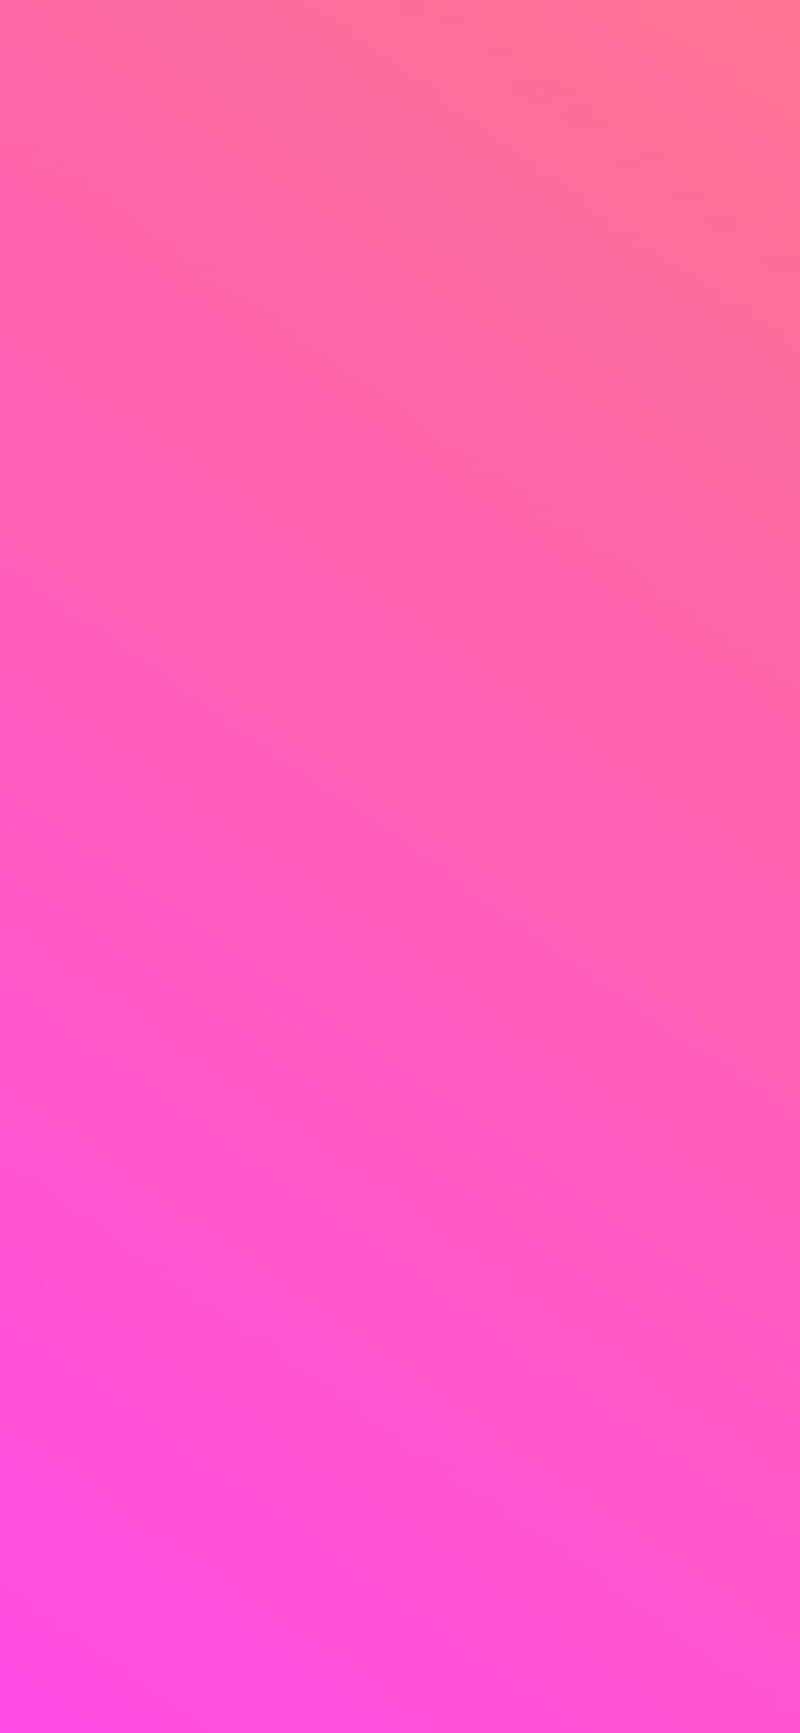 Bright and Bold Solid Pink Wallpaper Wallpaper